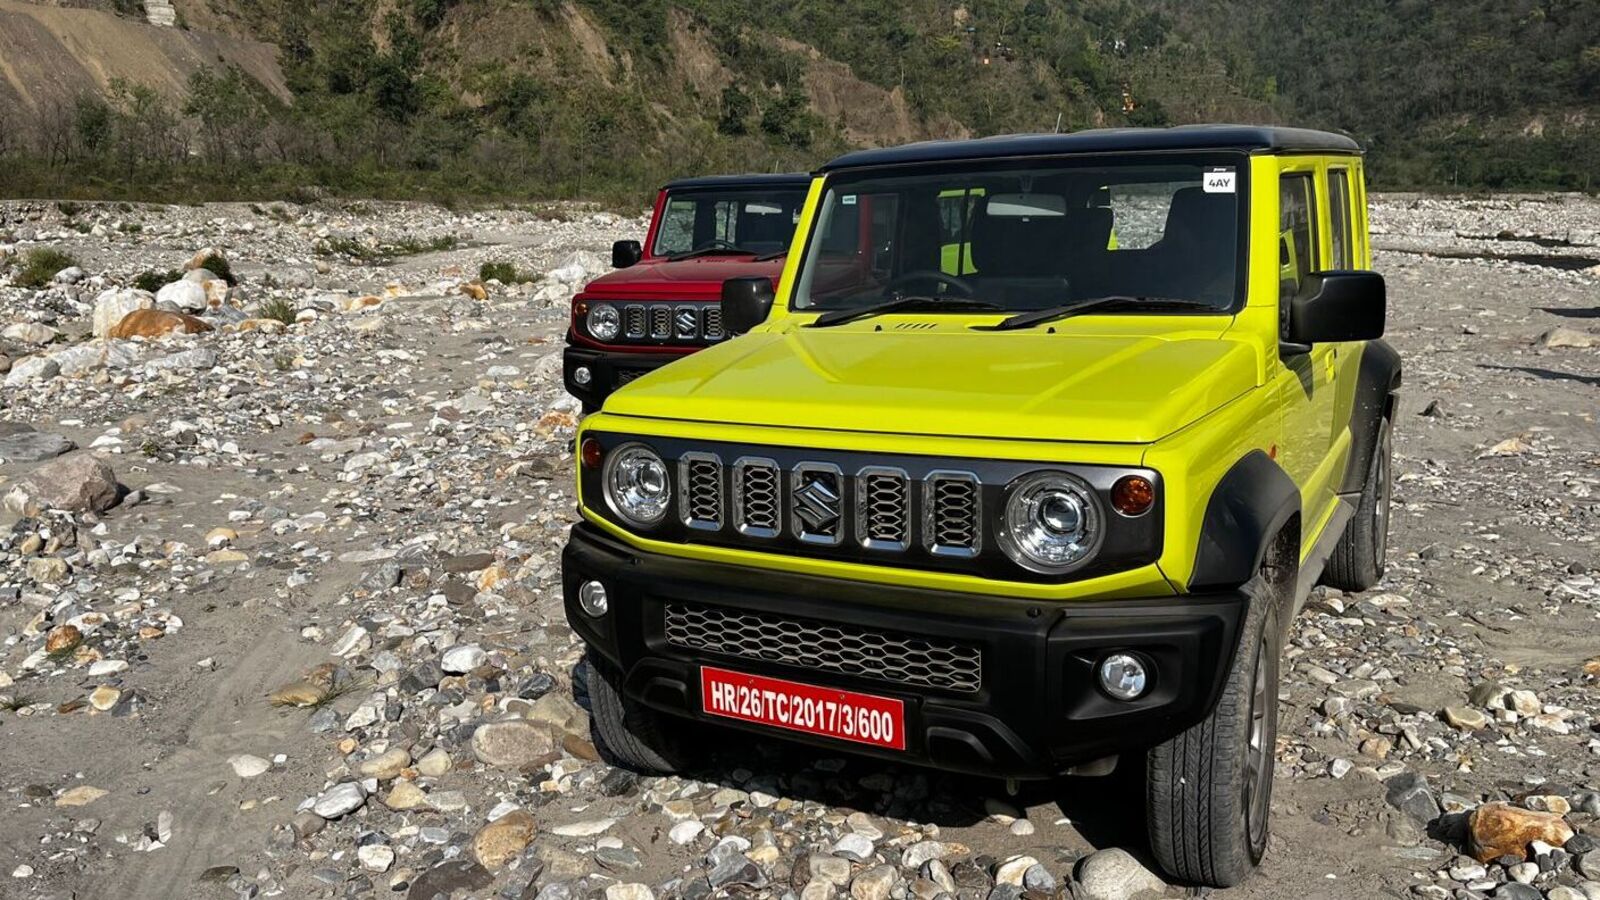 Maruti Suzuki Jimny gets over 30k bookings, launches first week of June